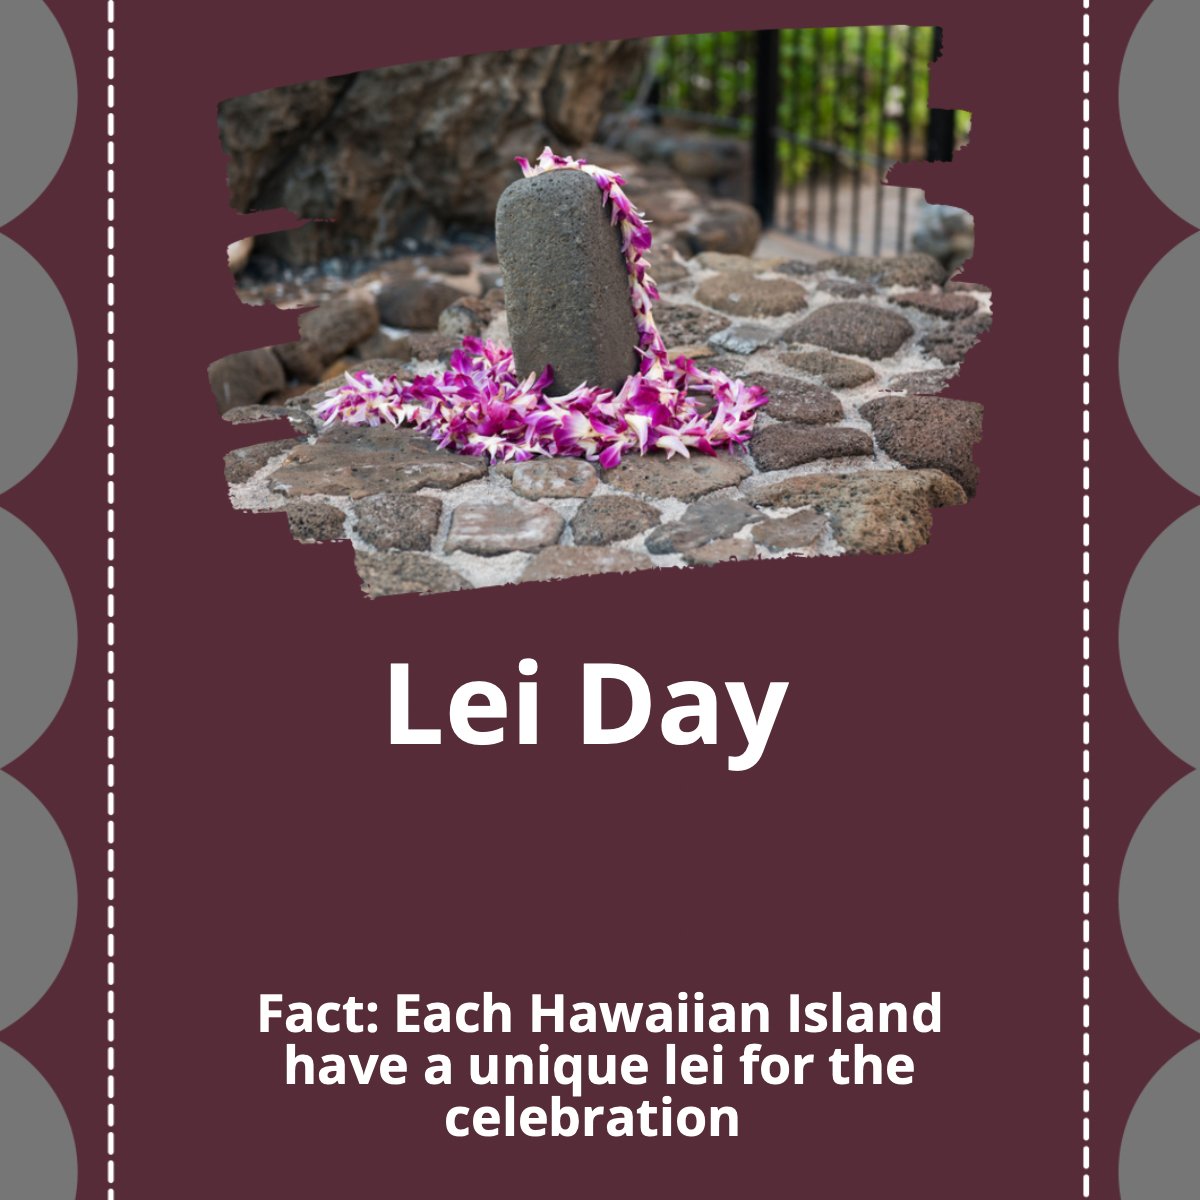 Happy Lei Day to all who celebrate 🙌! Did you know? 🤔 Each Hawaiian island has a unique lei for the celebration. 😱 #lei #day #hawaii #flowers #celebration #grey #RacingRealEstateAgent #BarrettRealEstate #StoneTreeRealEstateTeam #maricopaazrealestate